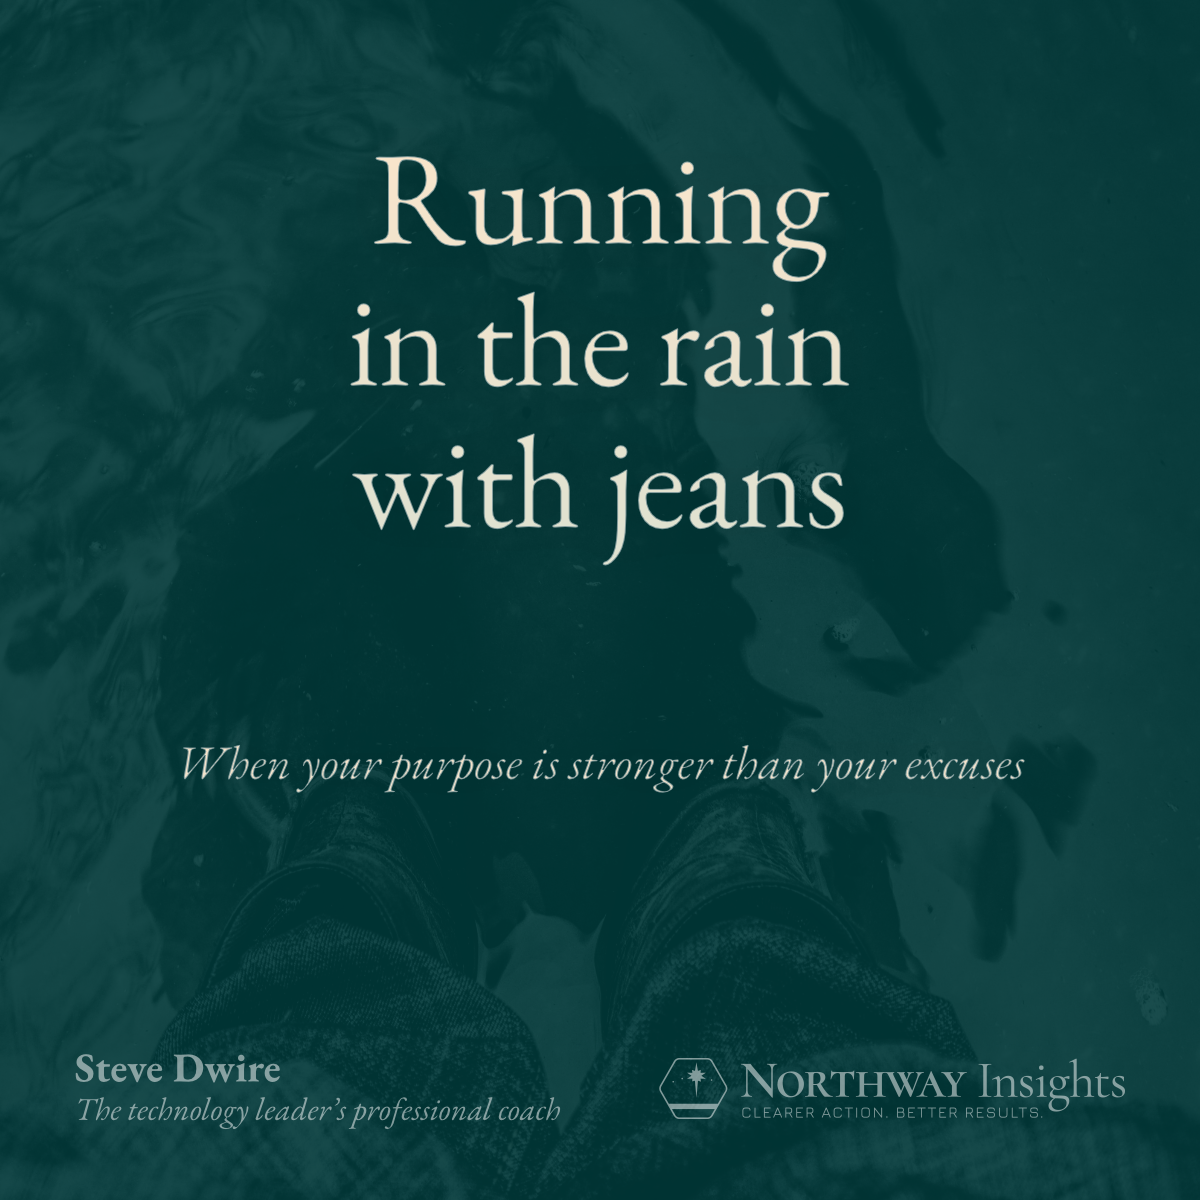 Running in the rain with jeans